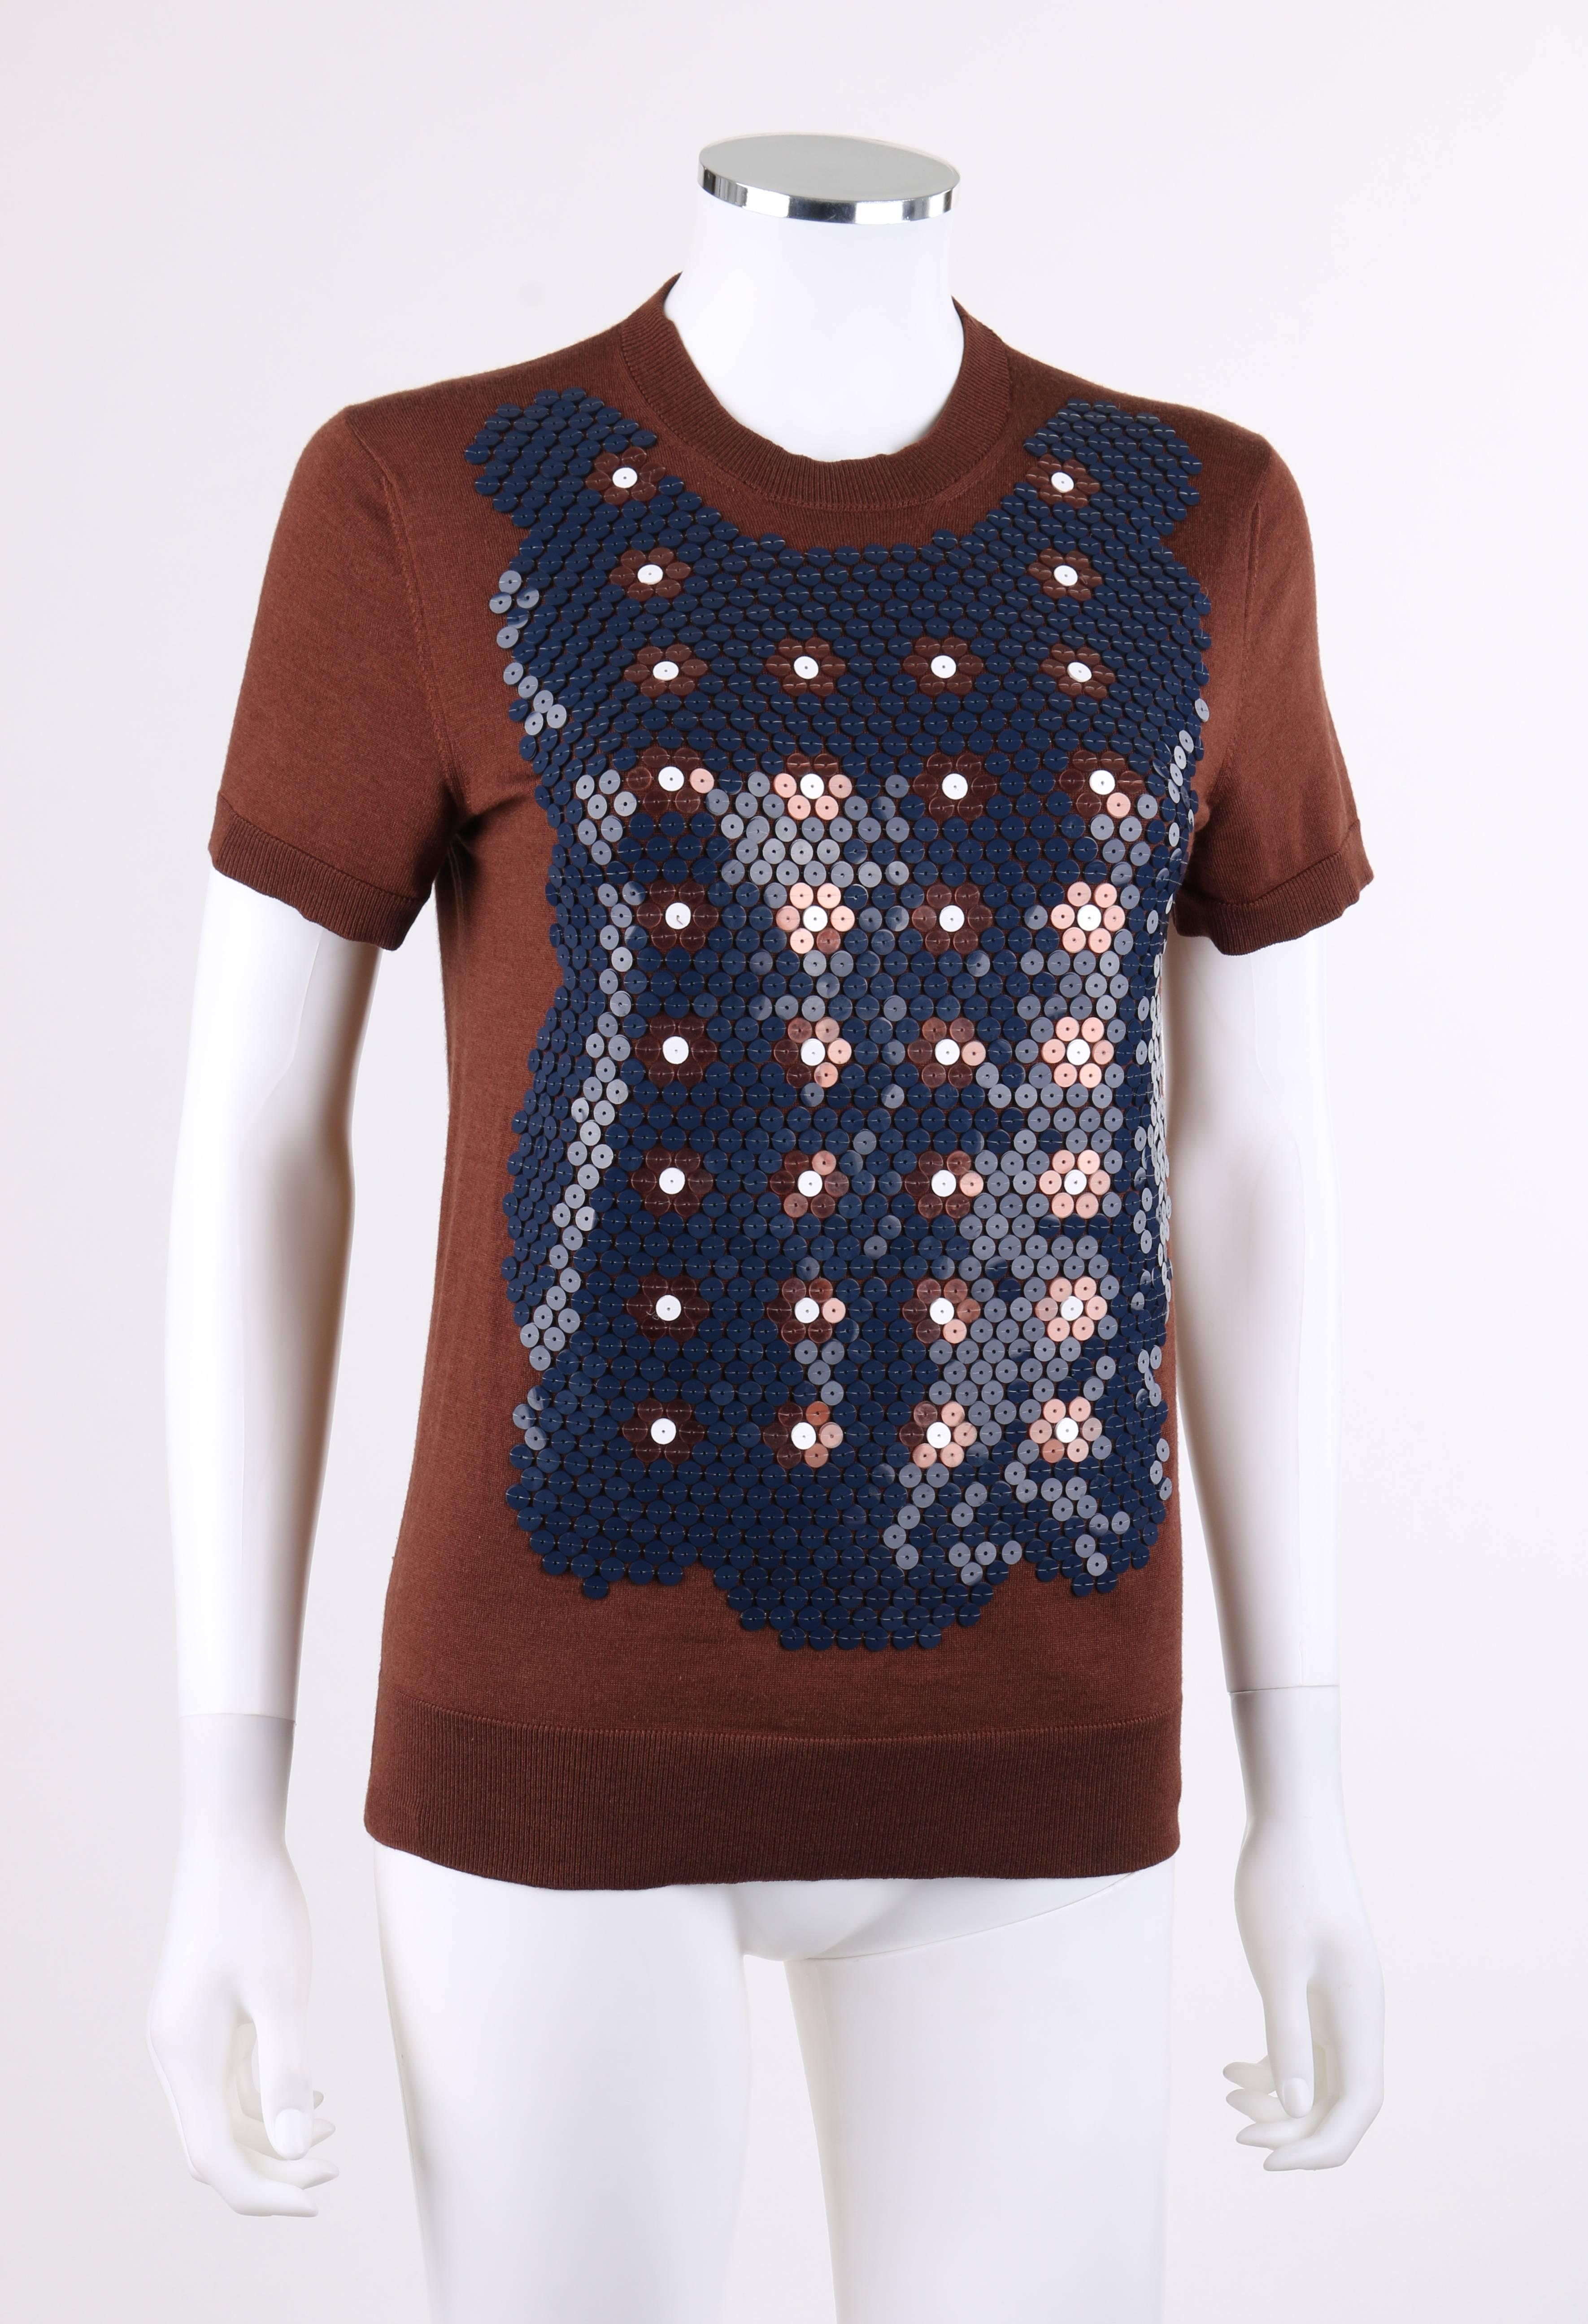 Louis Vuitton Resort 2013 brown wool / silk knit floral sequin embellished top. Designed by Marc Jacobs. Clear and white floral motif with navy blue sequin embellishment at front. Scoop neckline. Short sleeves. Pull on style. Rib knit detal and